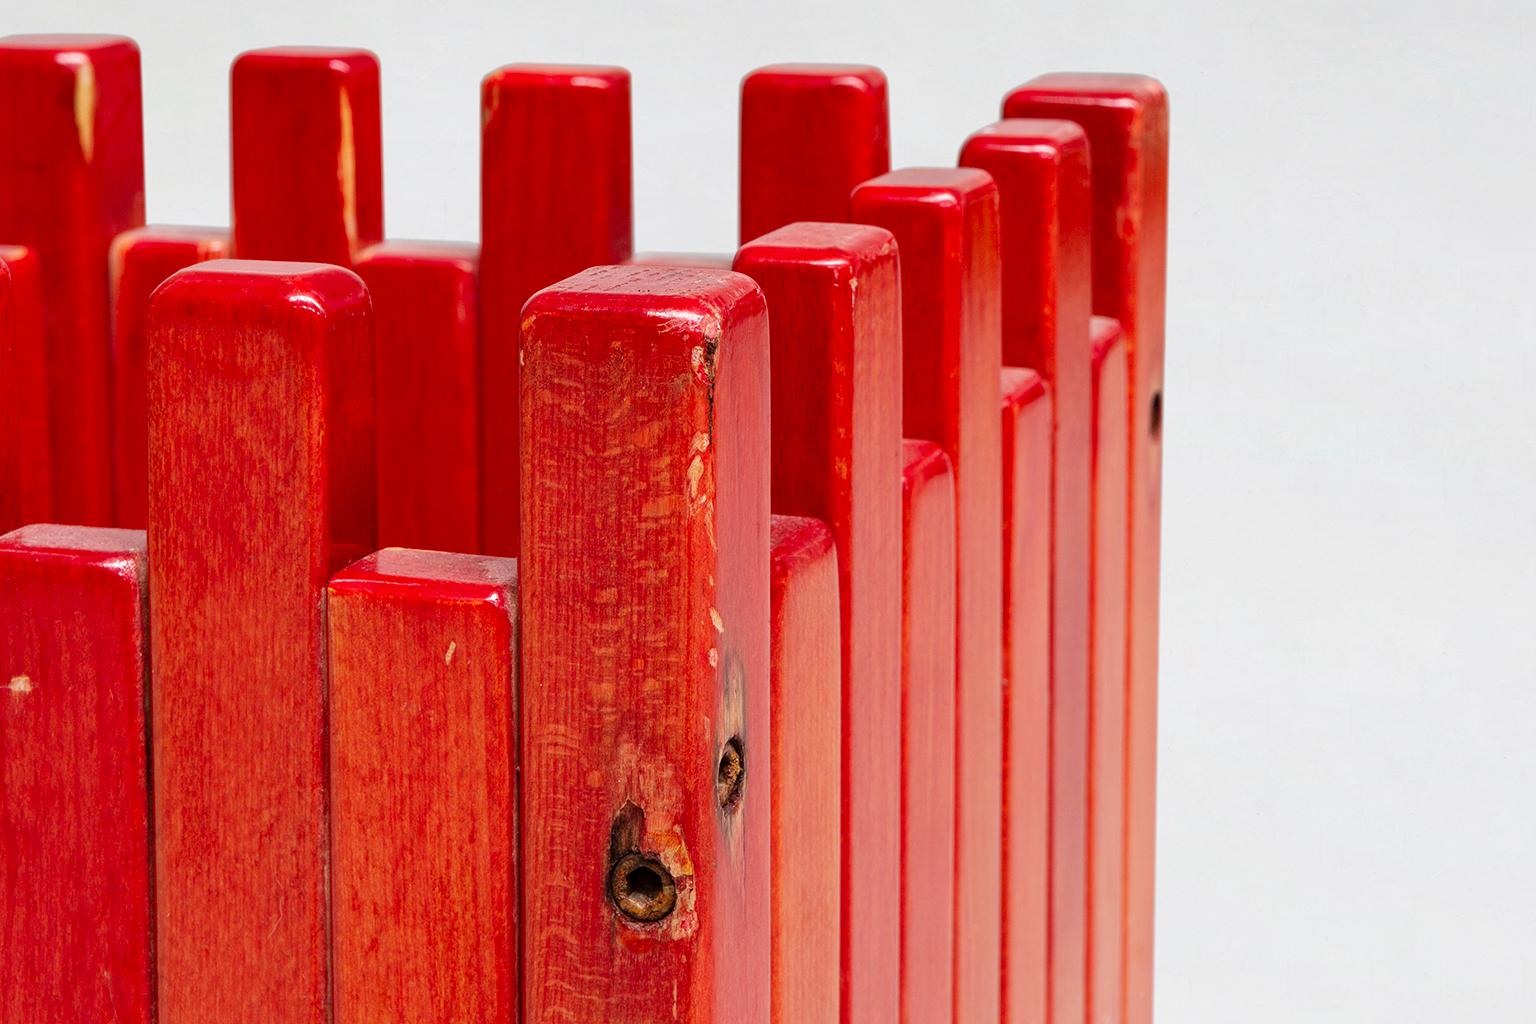 Post-Modern Italian Umbrella-Stand in Painted Wood, by Ettore Sottsass for Poltronova, 1962